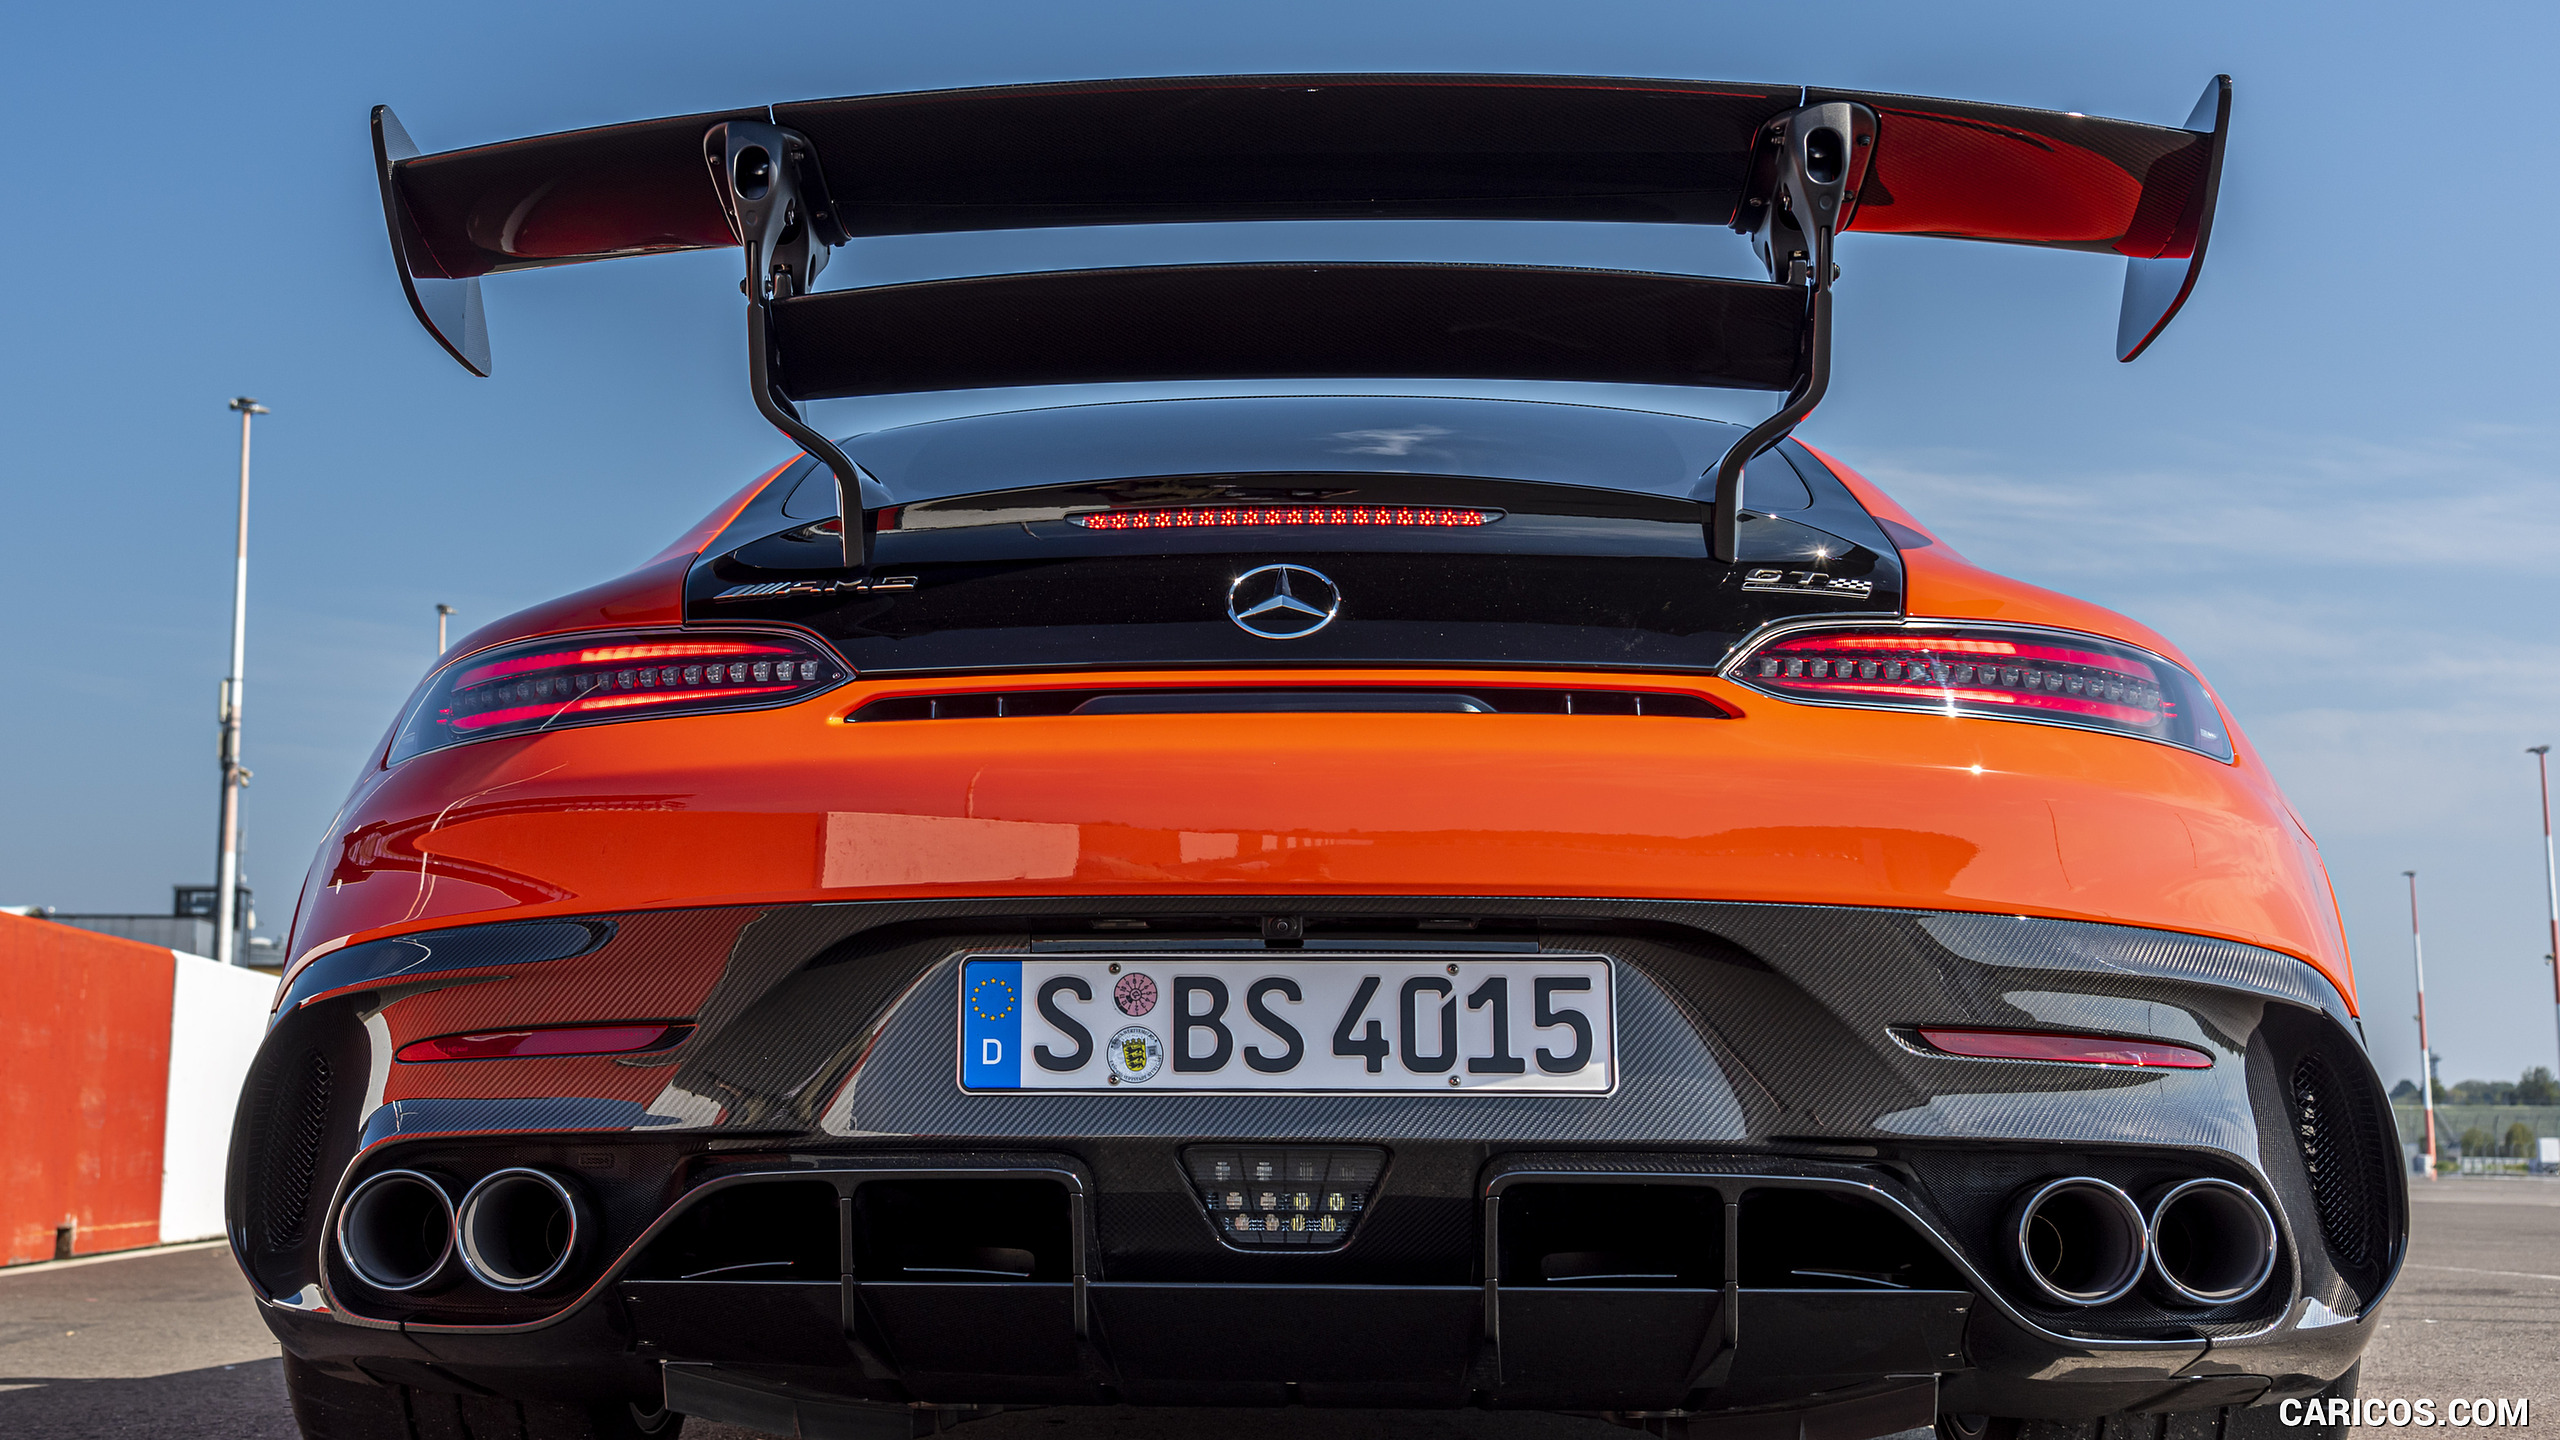 2021 Mercedes-AMG GT Black Series (Color: Magma Beam) - Rear, #181 of 215